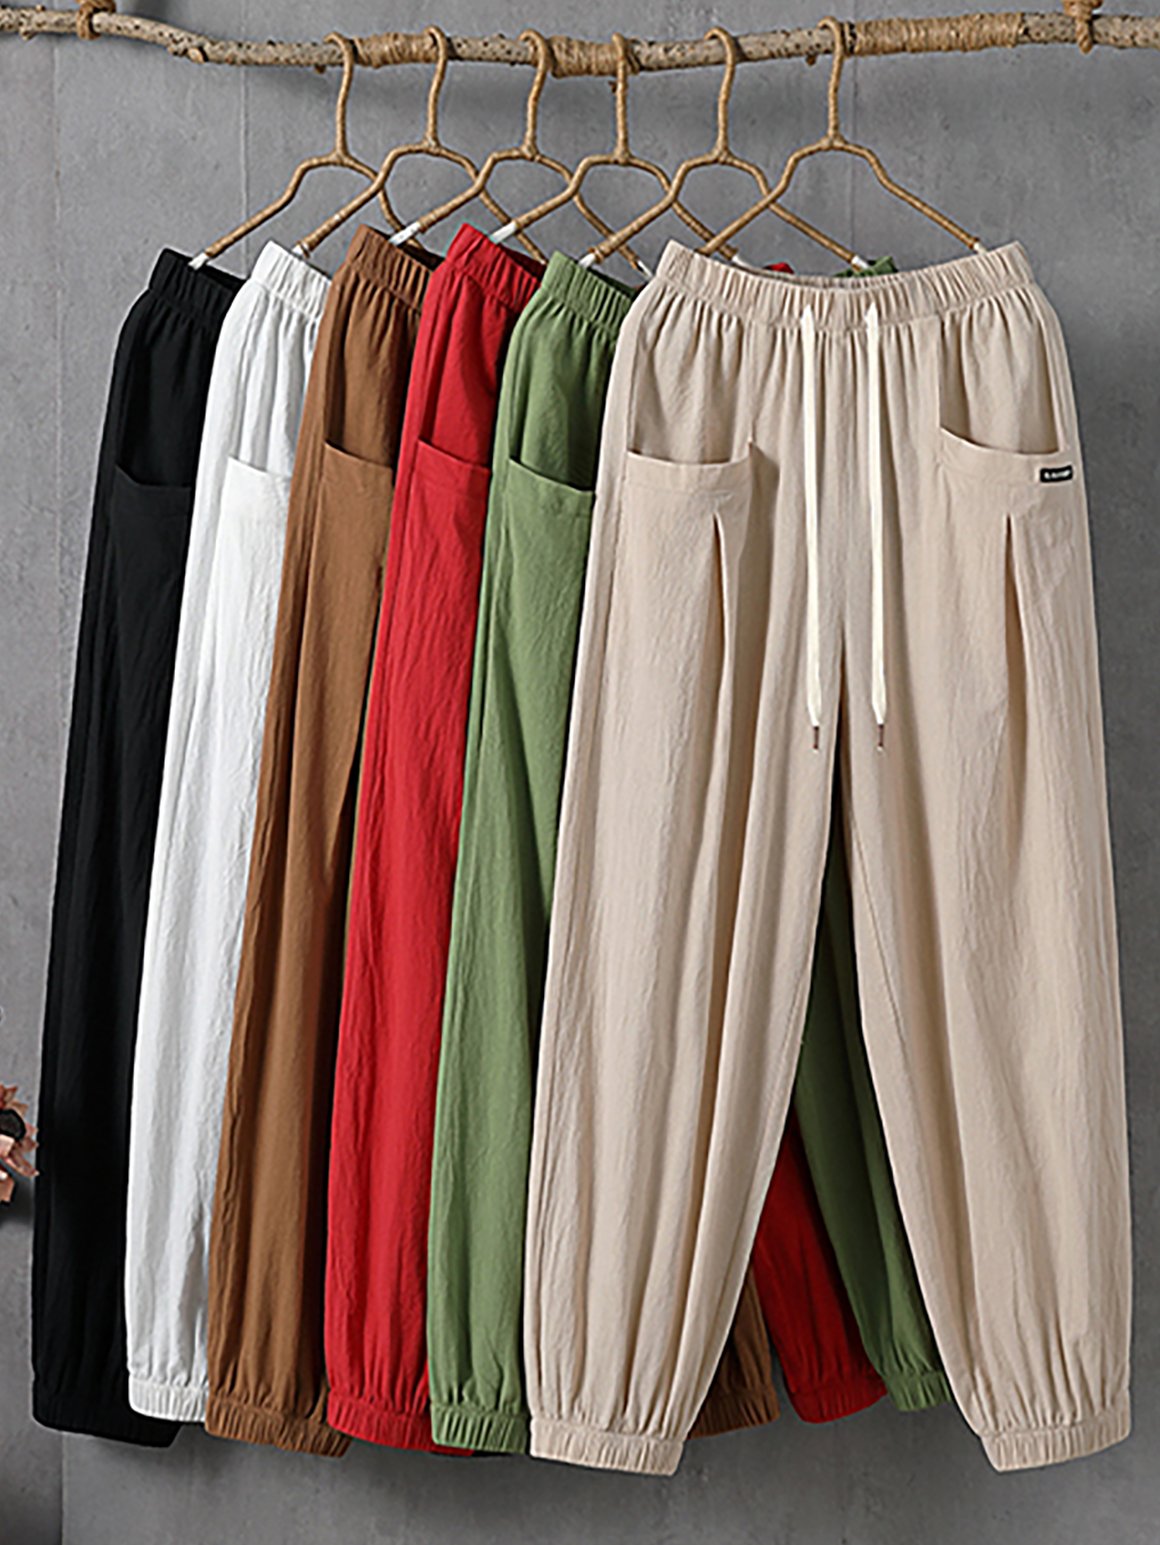 Women's Elastic Waist H-Line Ankle Banded Pants Daily Going Out Pants Casual Pocket Stitching Cotton Plain Spring/Fall Pants